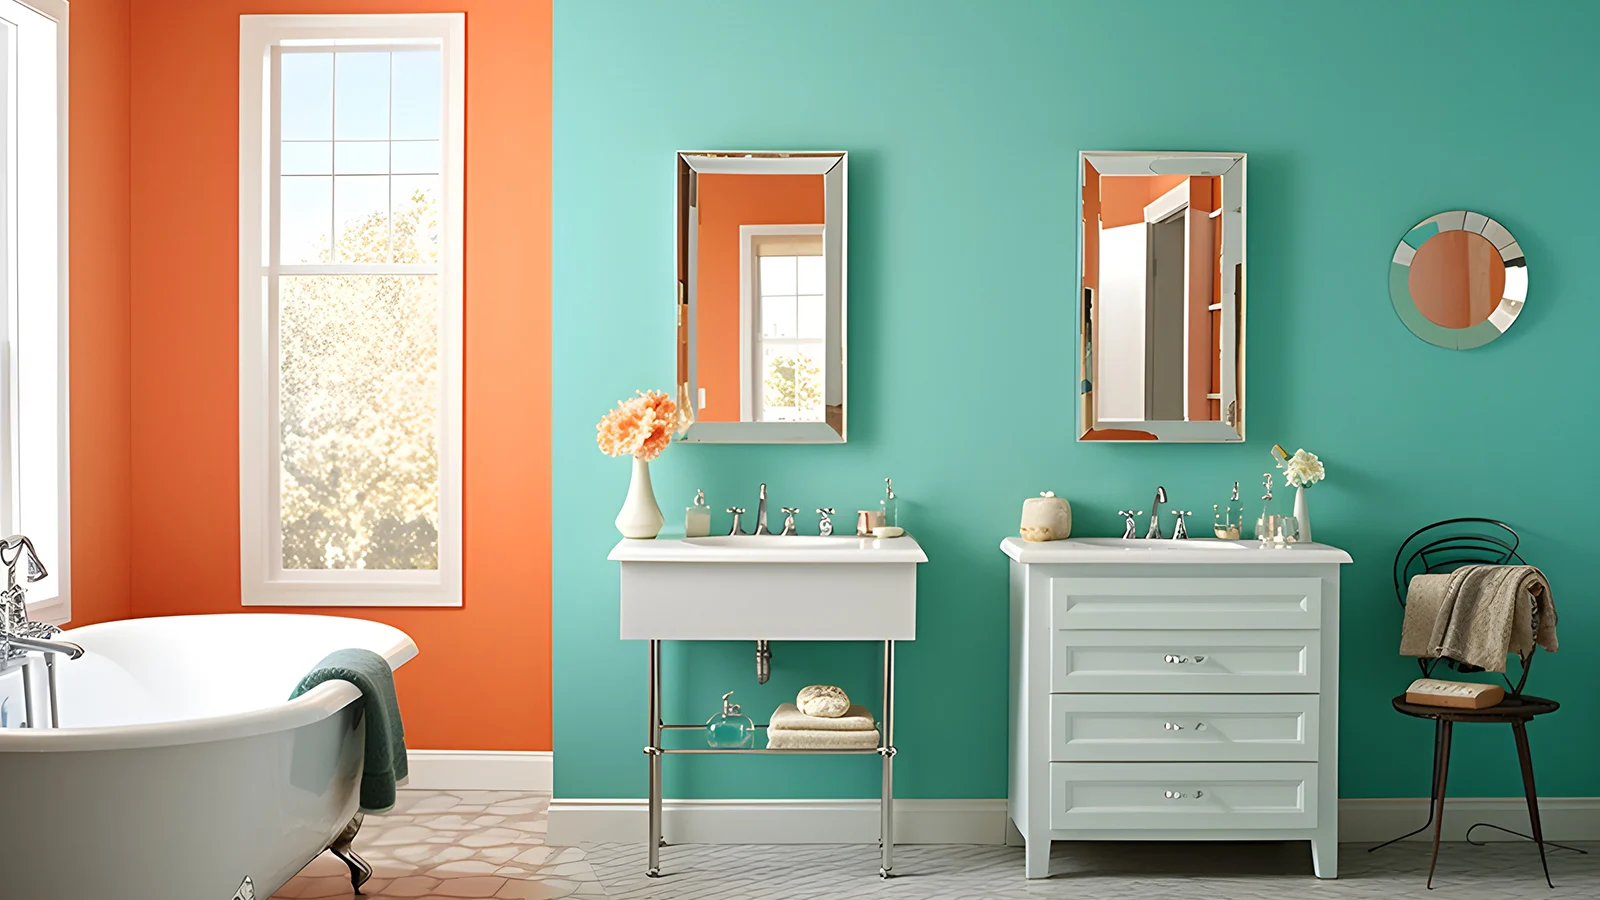 Discover various ways to decorate your apartment bathroom with orange and turquoise walls.